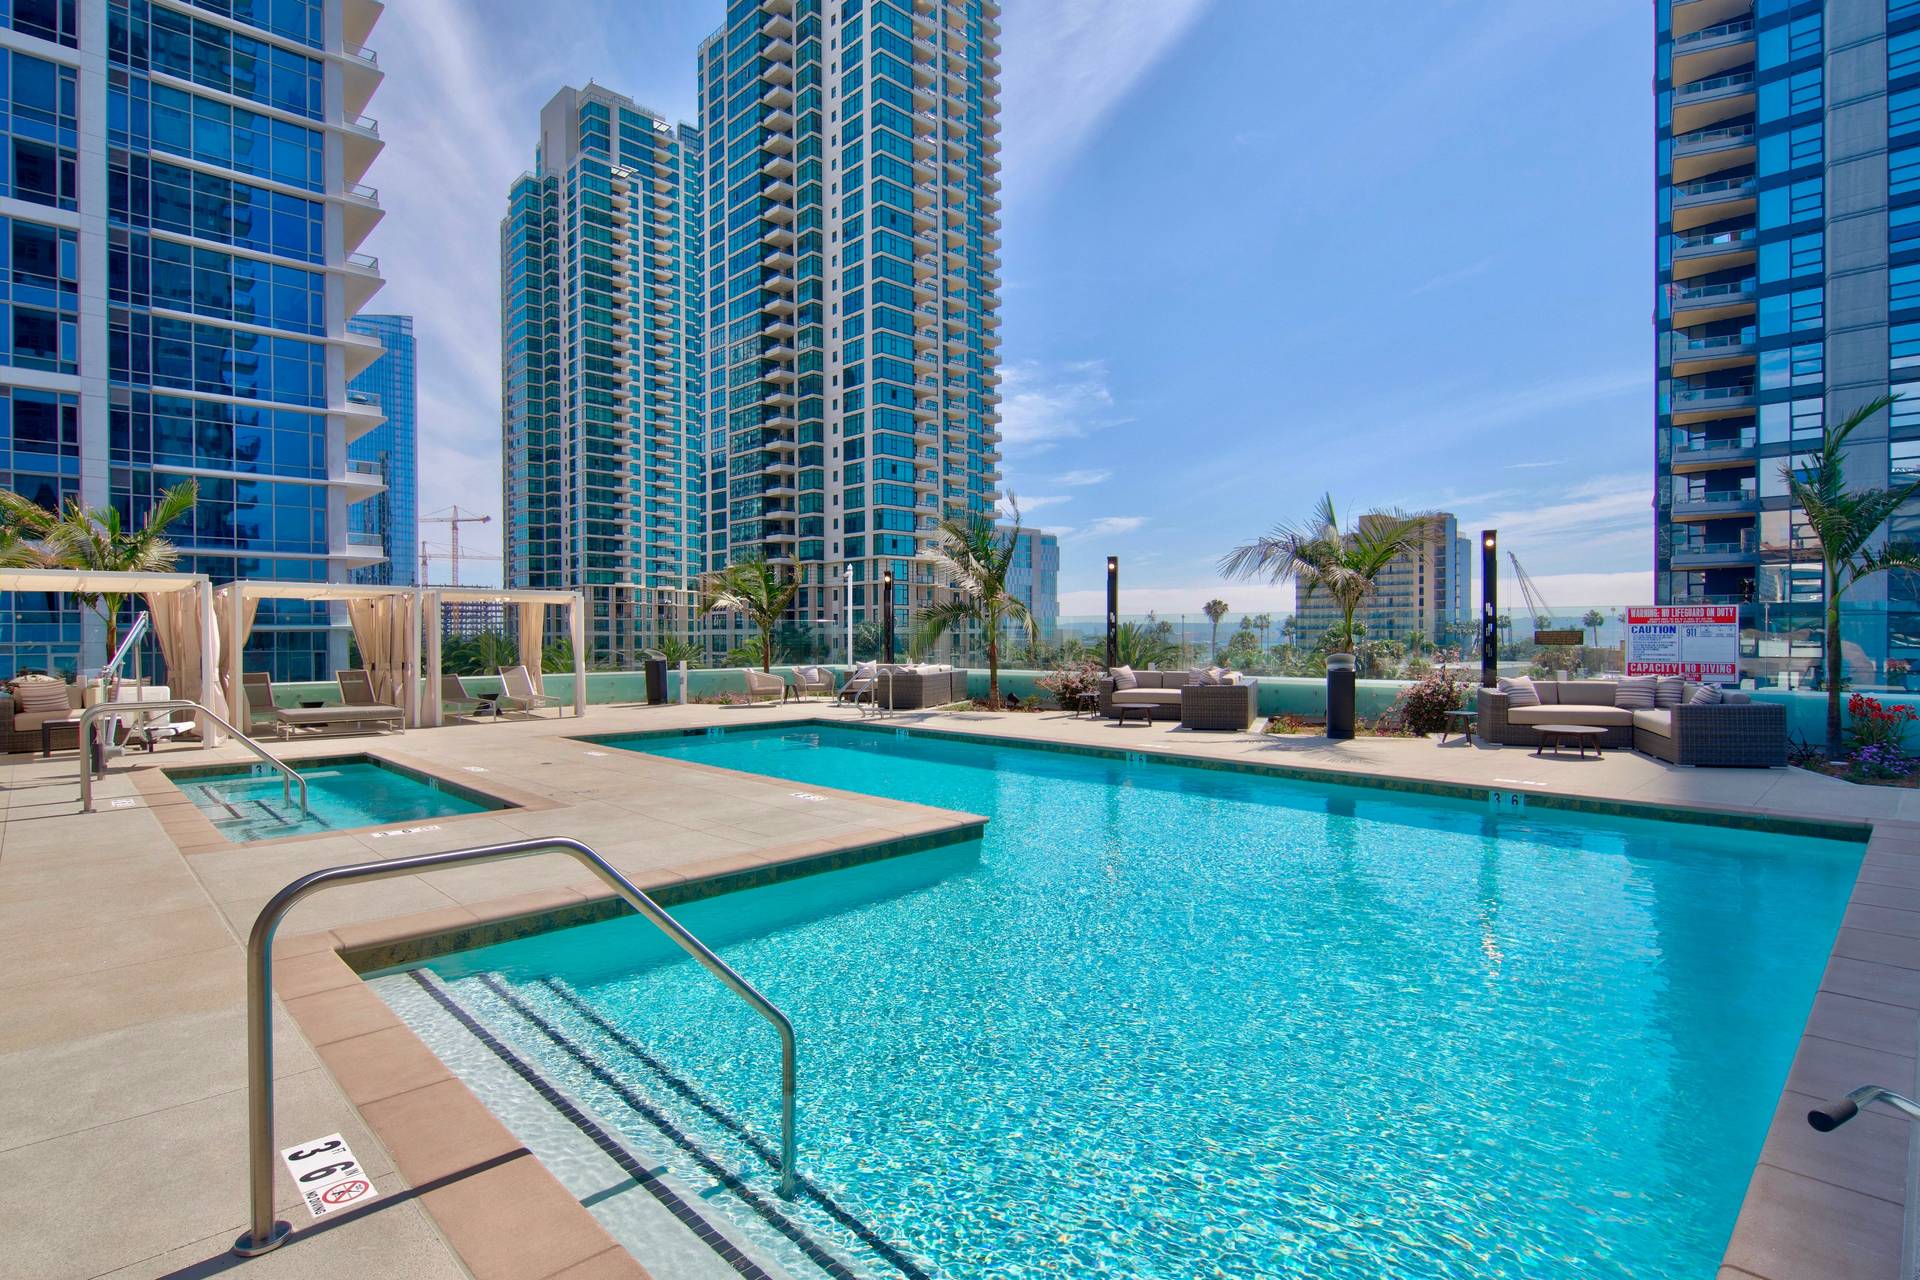 Pool deck features cabanas, a fire pit and spa